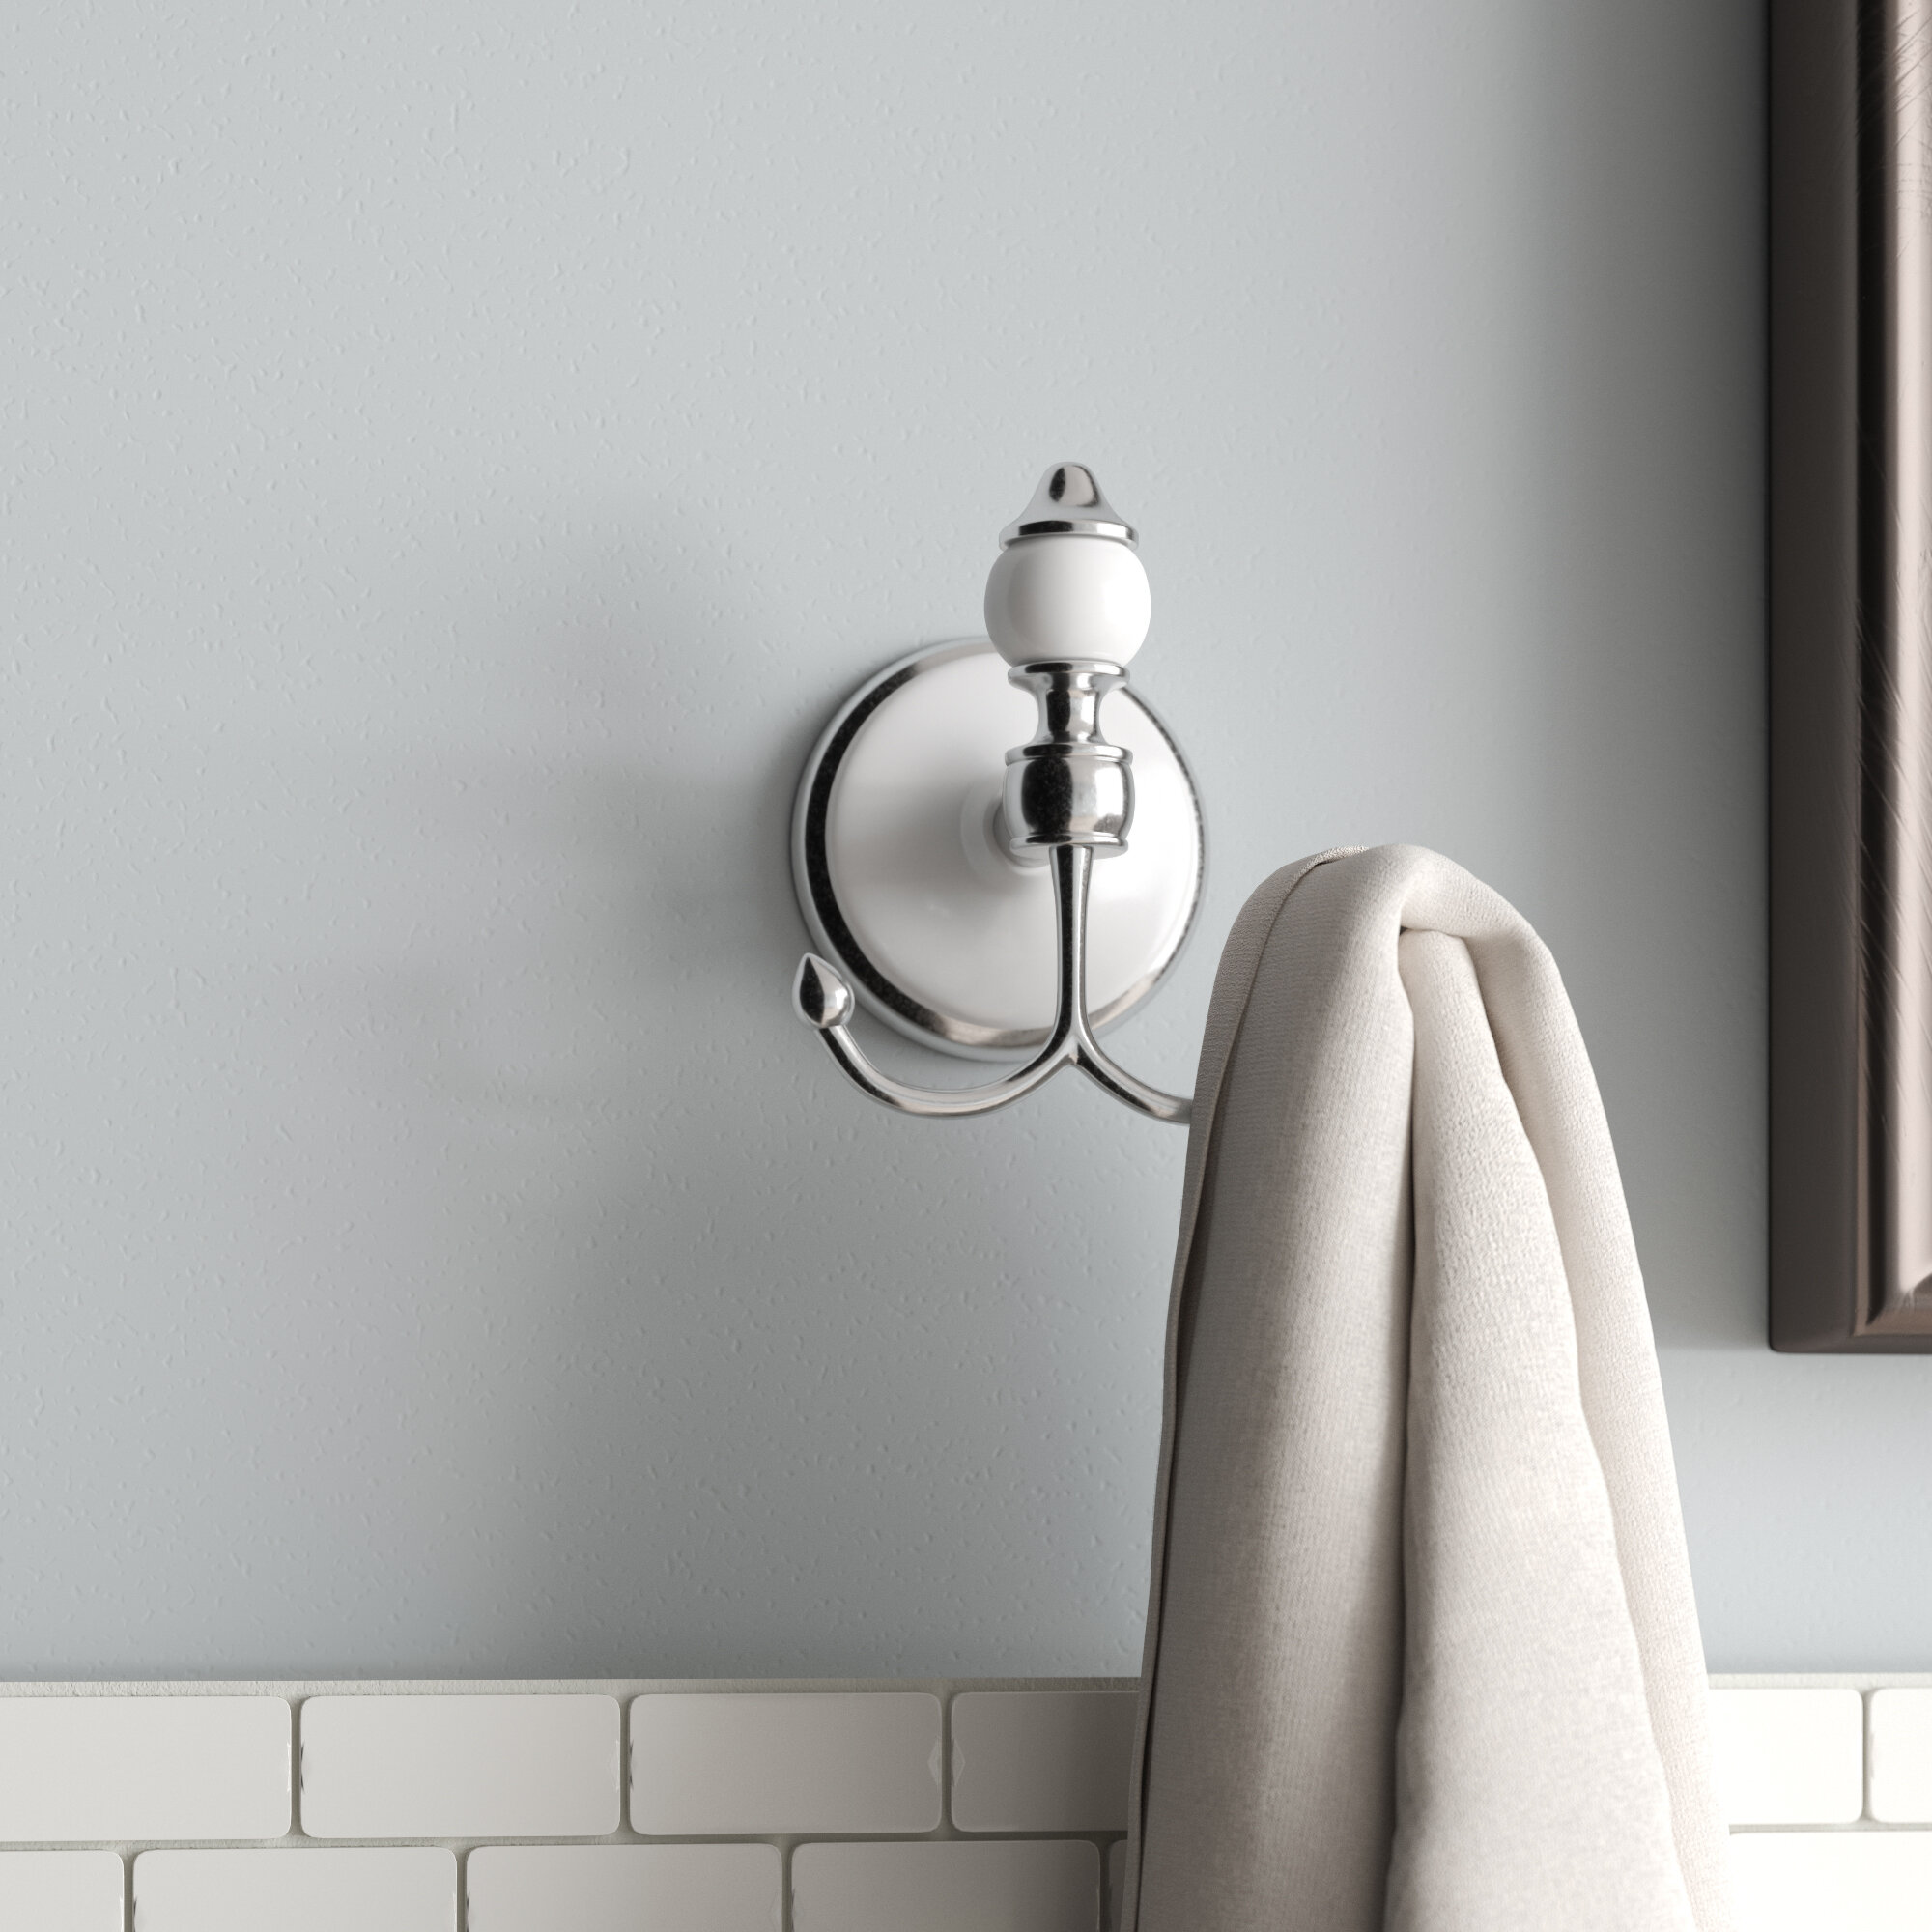 Towel Wall l Water and Rusty Wall Hook Towel Towel Single Door Stainless Steel Wall-Mounted Retro Punch 62cm 